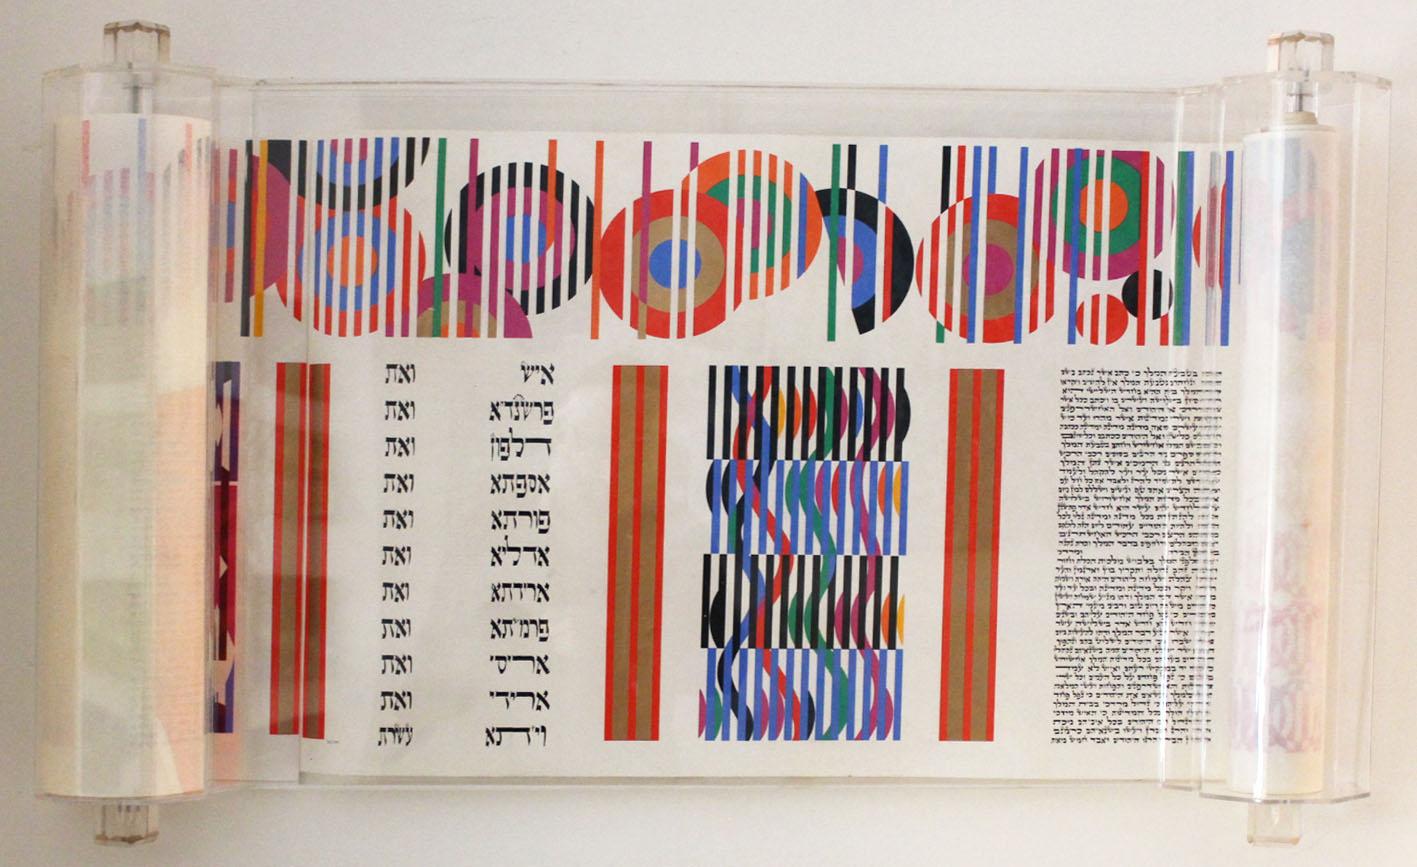 Yaacov Agam
Megillah (Scroll of Esther), circa 1980
Serigraph on parchment arranged in 11 columns on 8 membranes  

The megillah text is hand written by a scribe and kosher to read on Purim.  The Megillah will be shipped within 10 days of